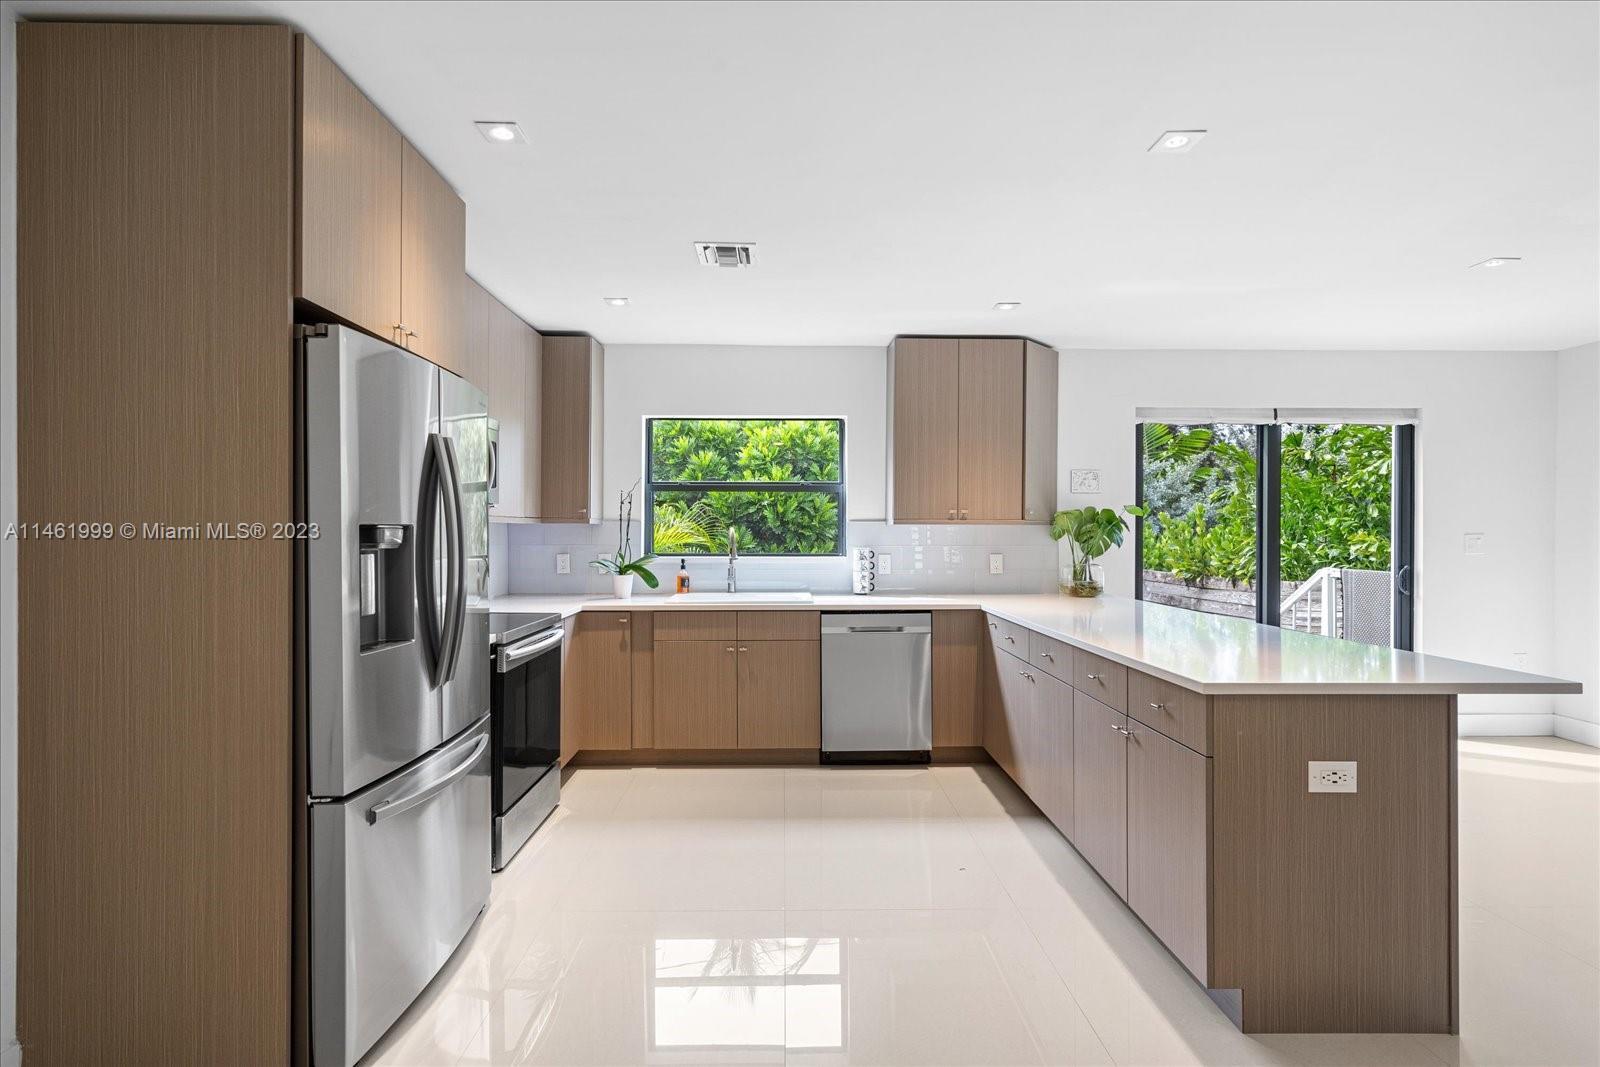 NEW 2020 3/2.5ba, 1 car garage, Modern Townhome in the heart of Ft. Lauderdale! Features open concep